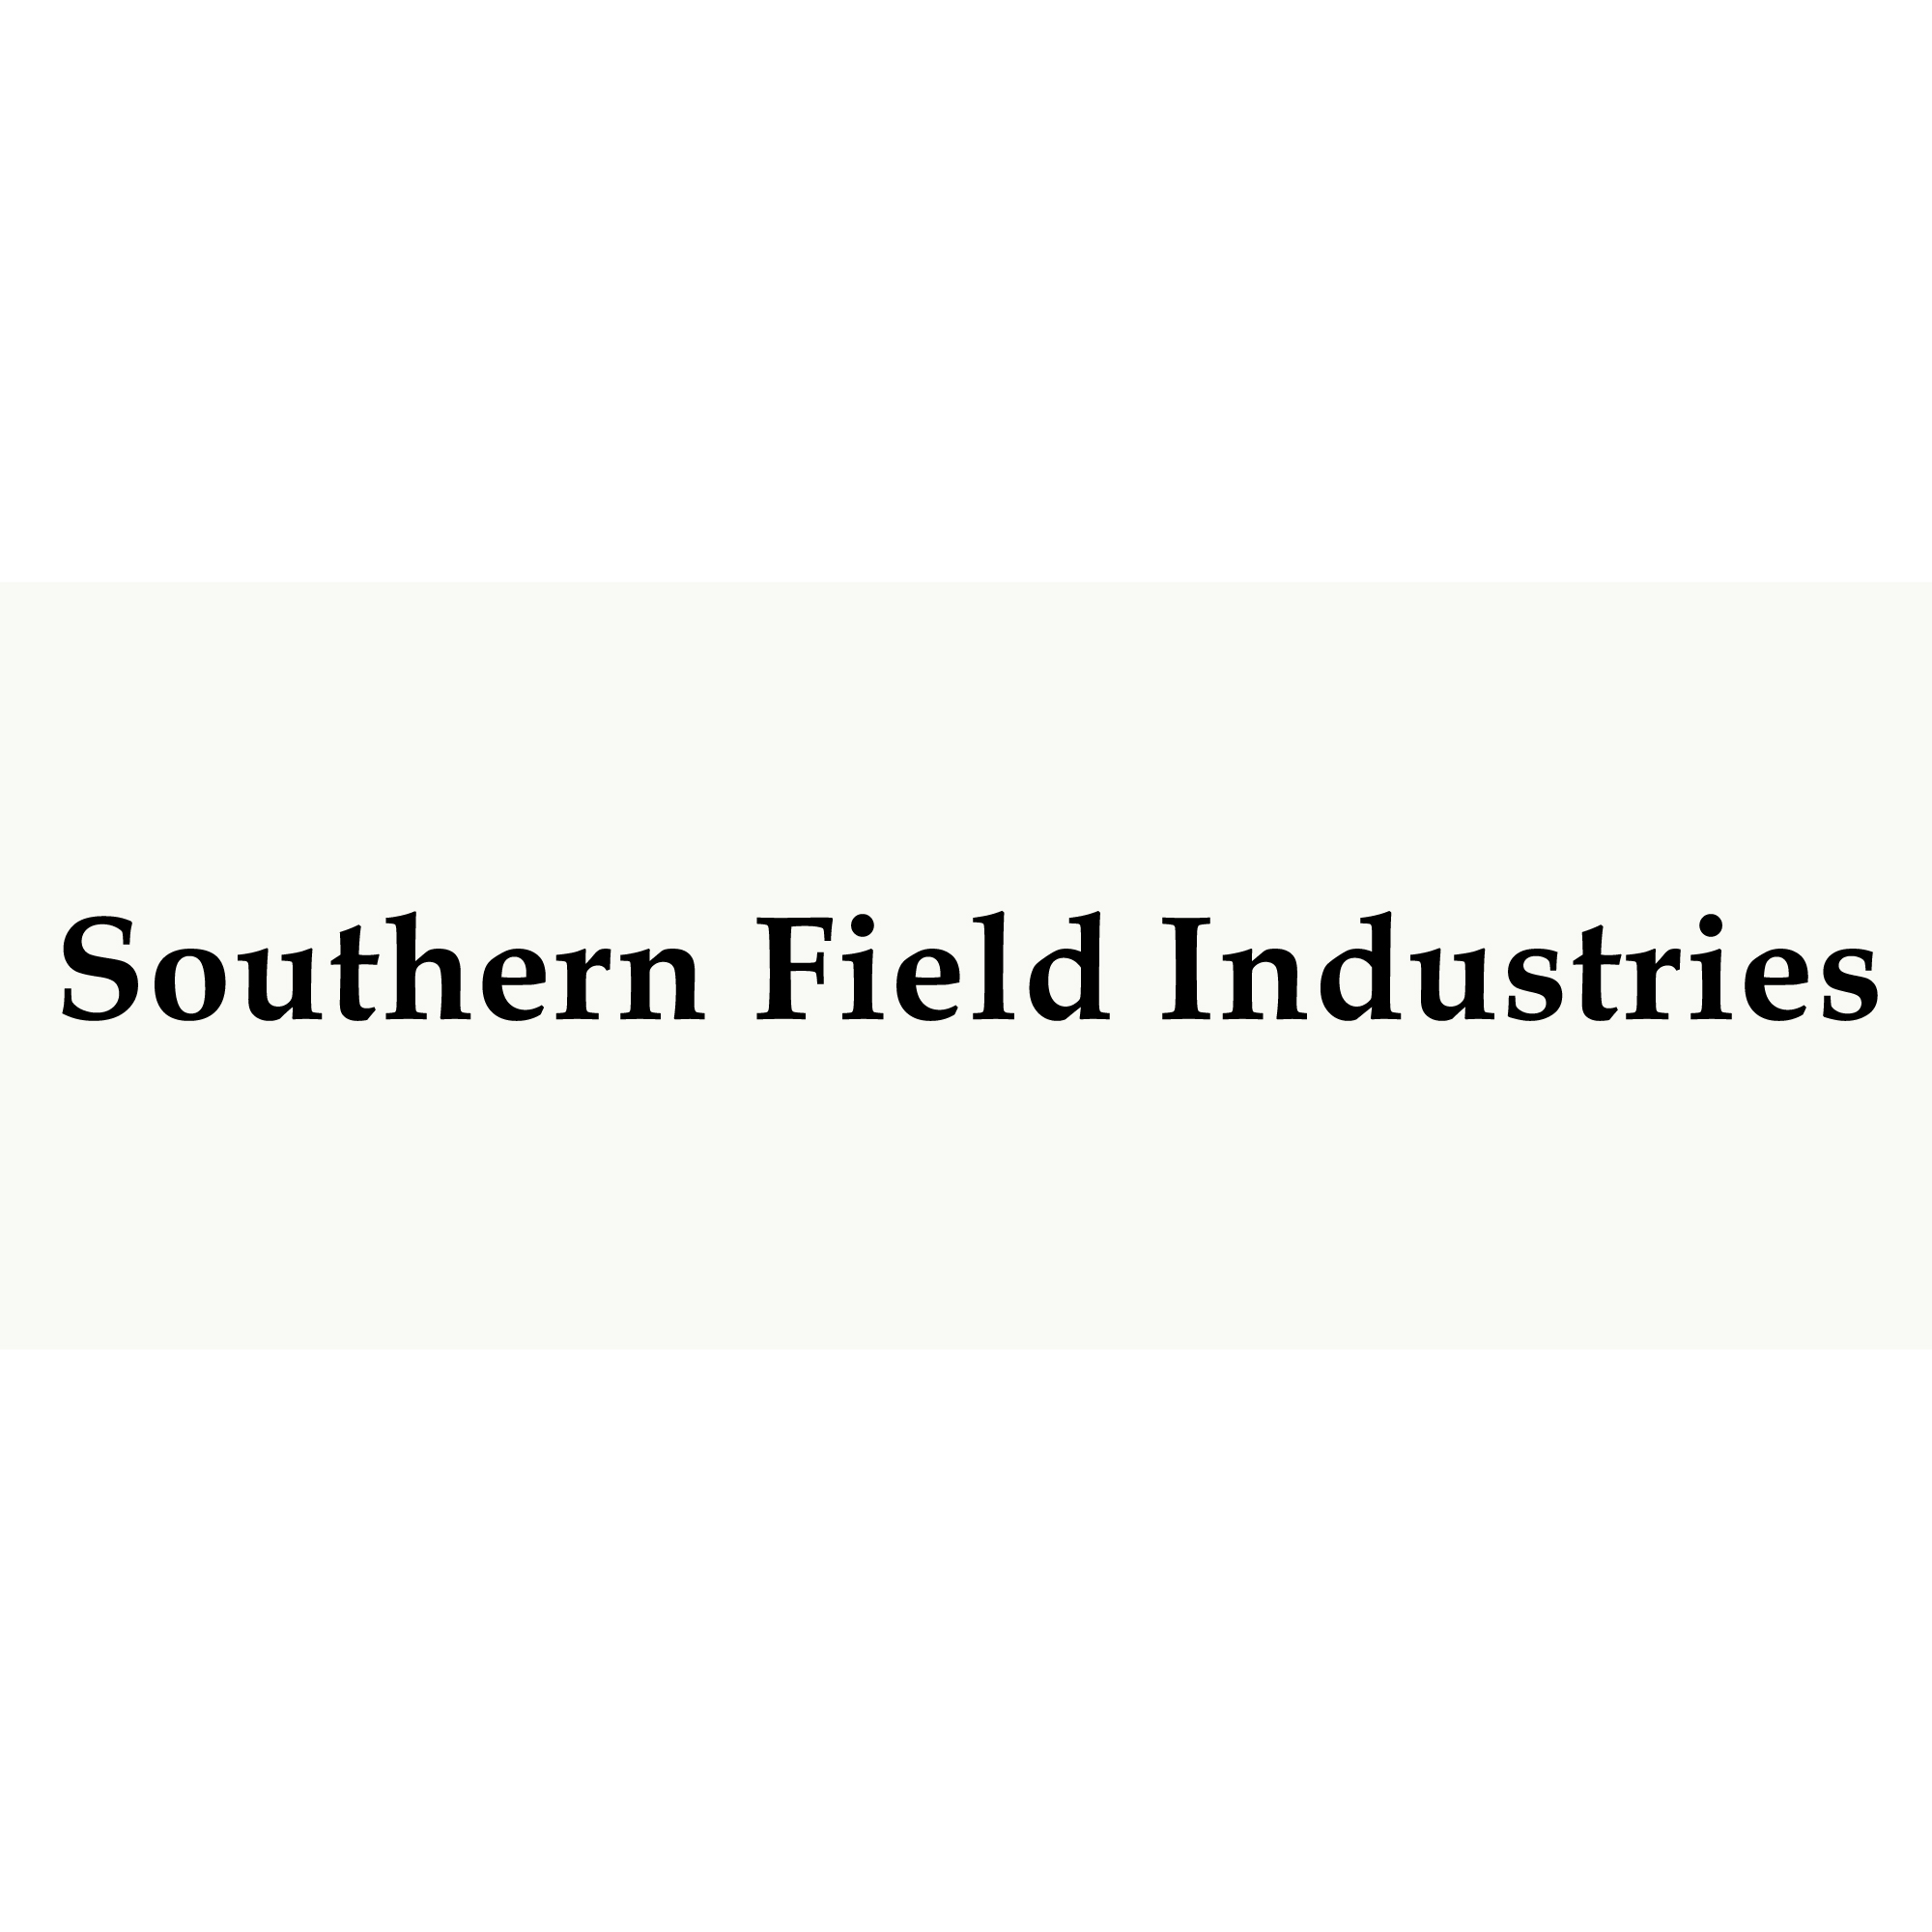 Southern Field Industries